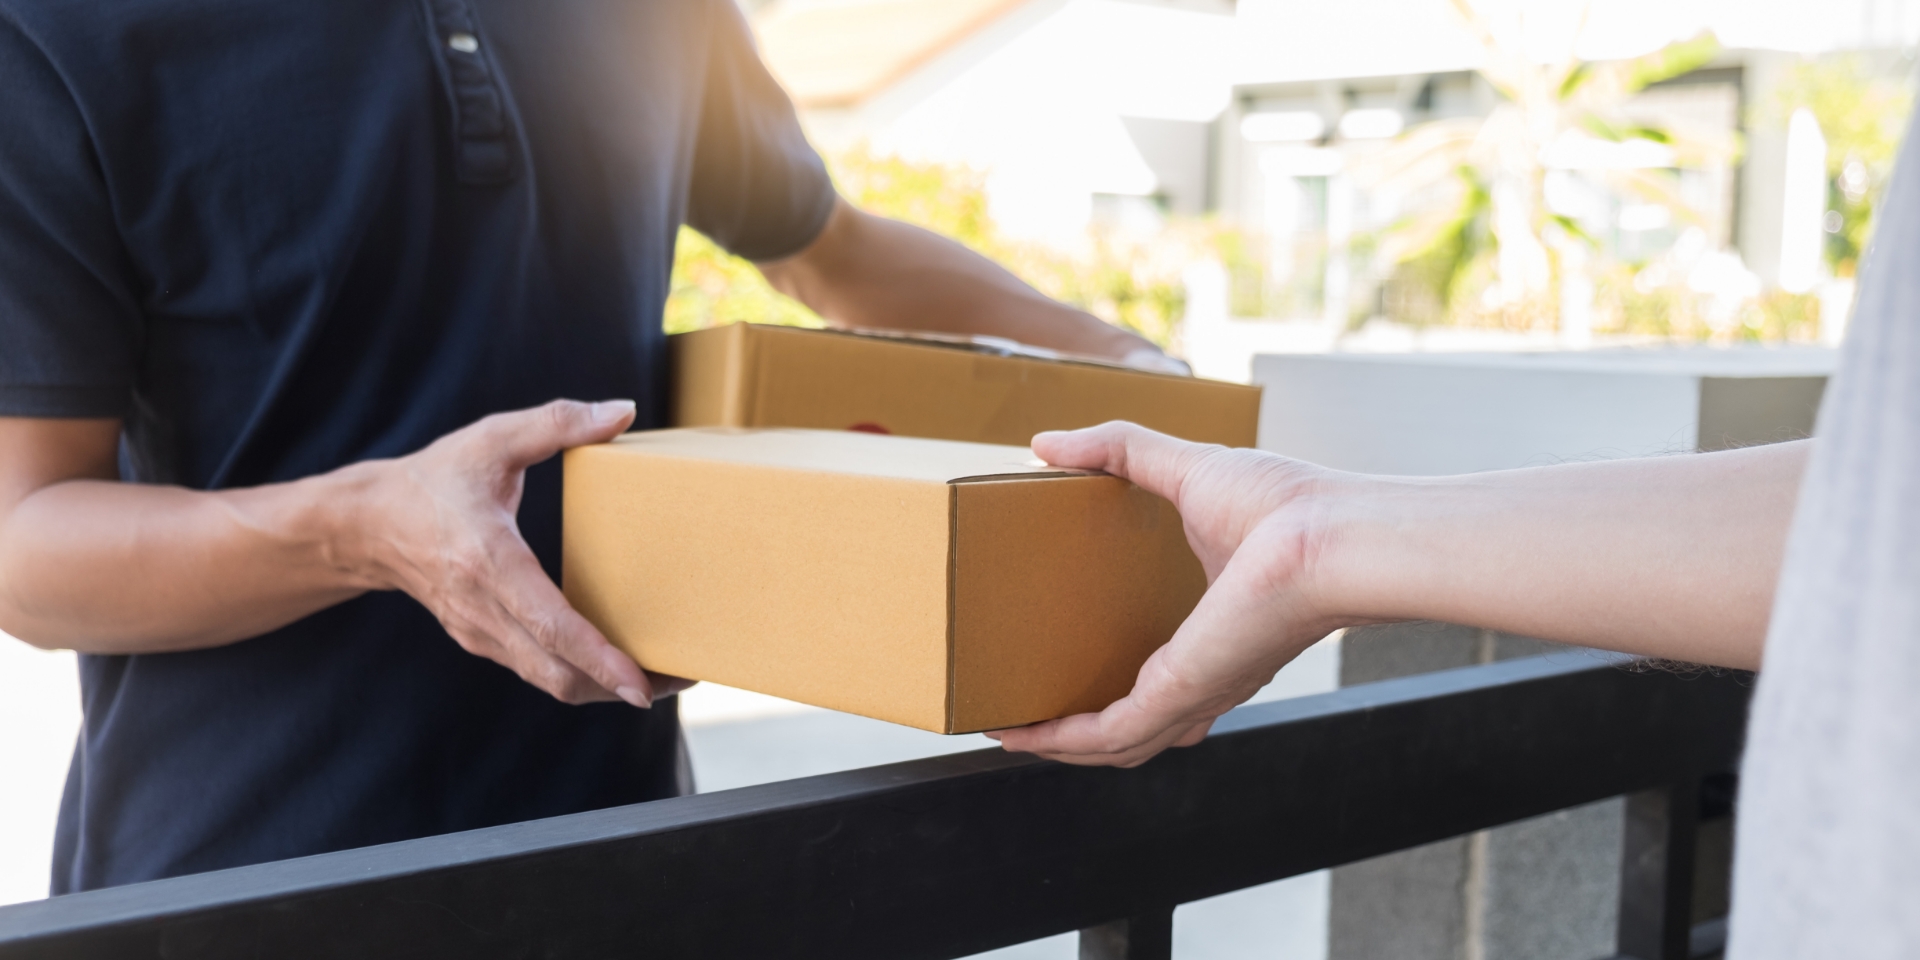 Reduce How Shipping Delays Impact Your Customer Experience